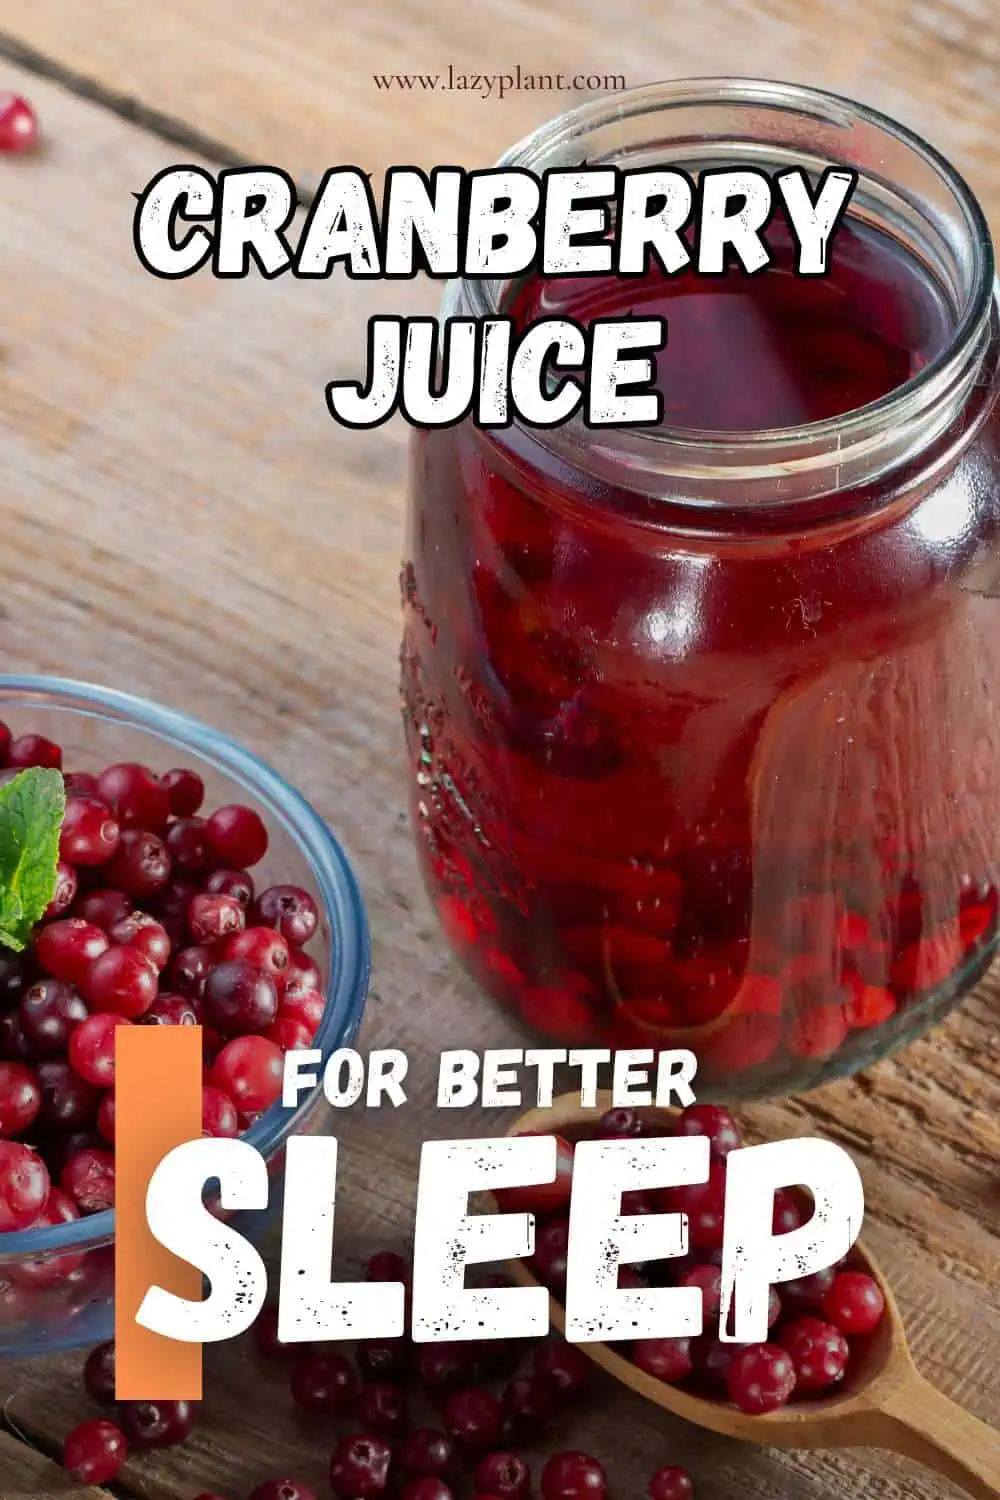 Drink cranberry juice before bed for a good night’s sleep.